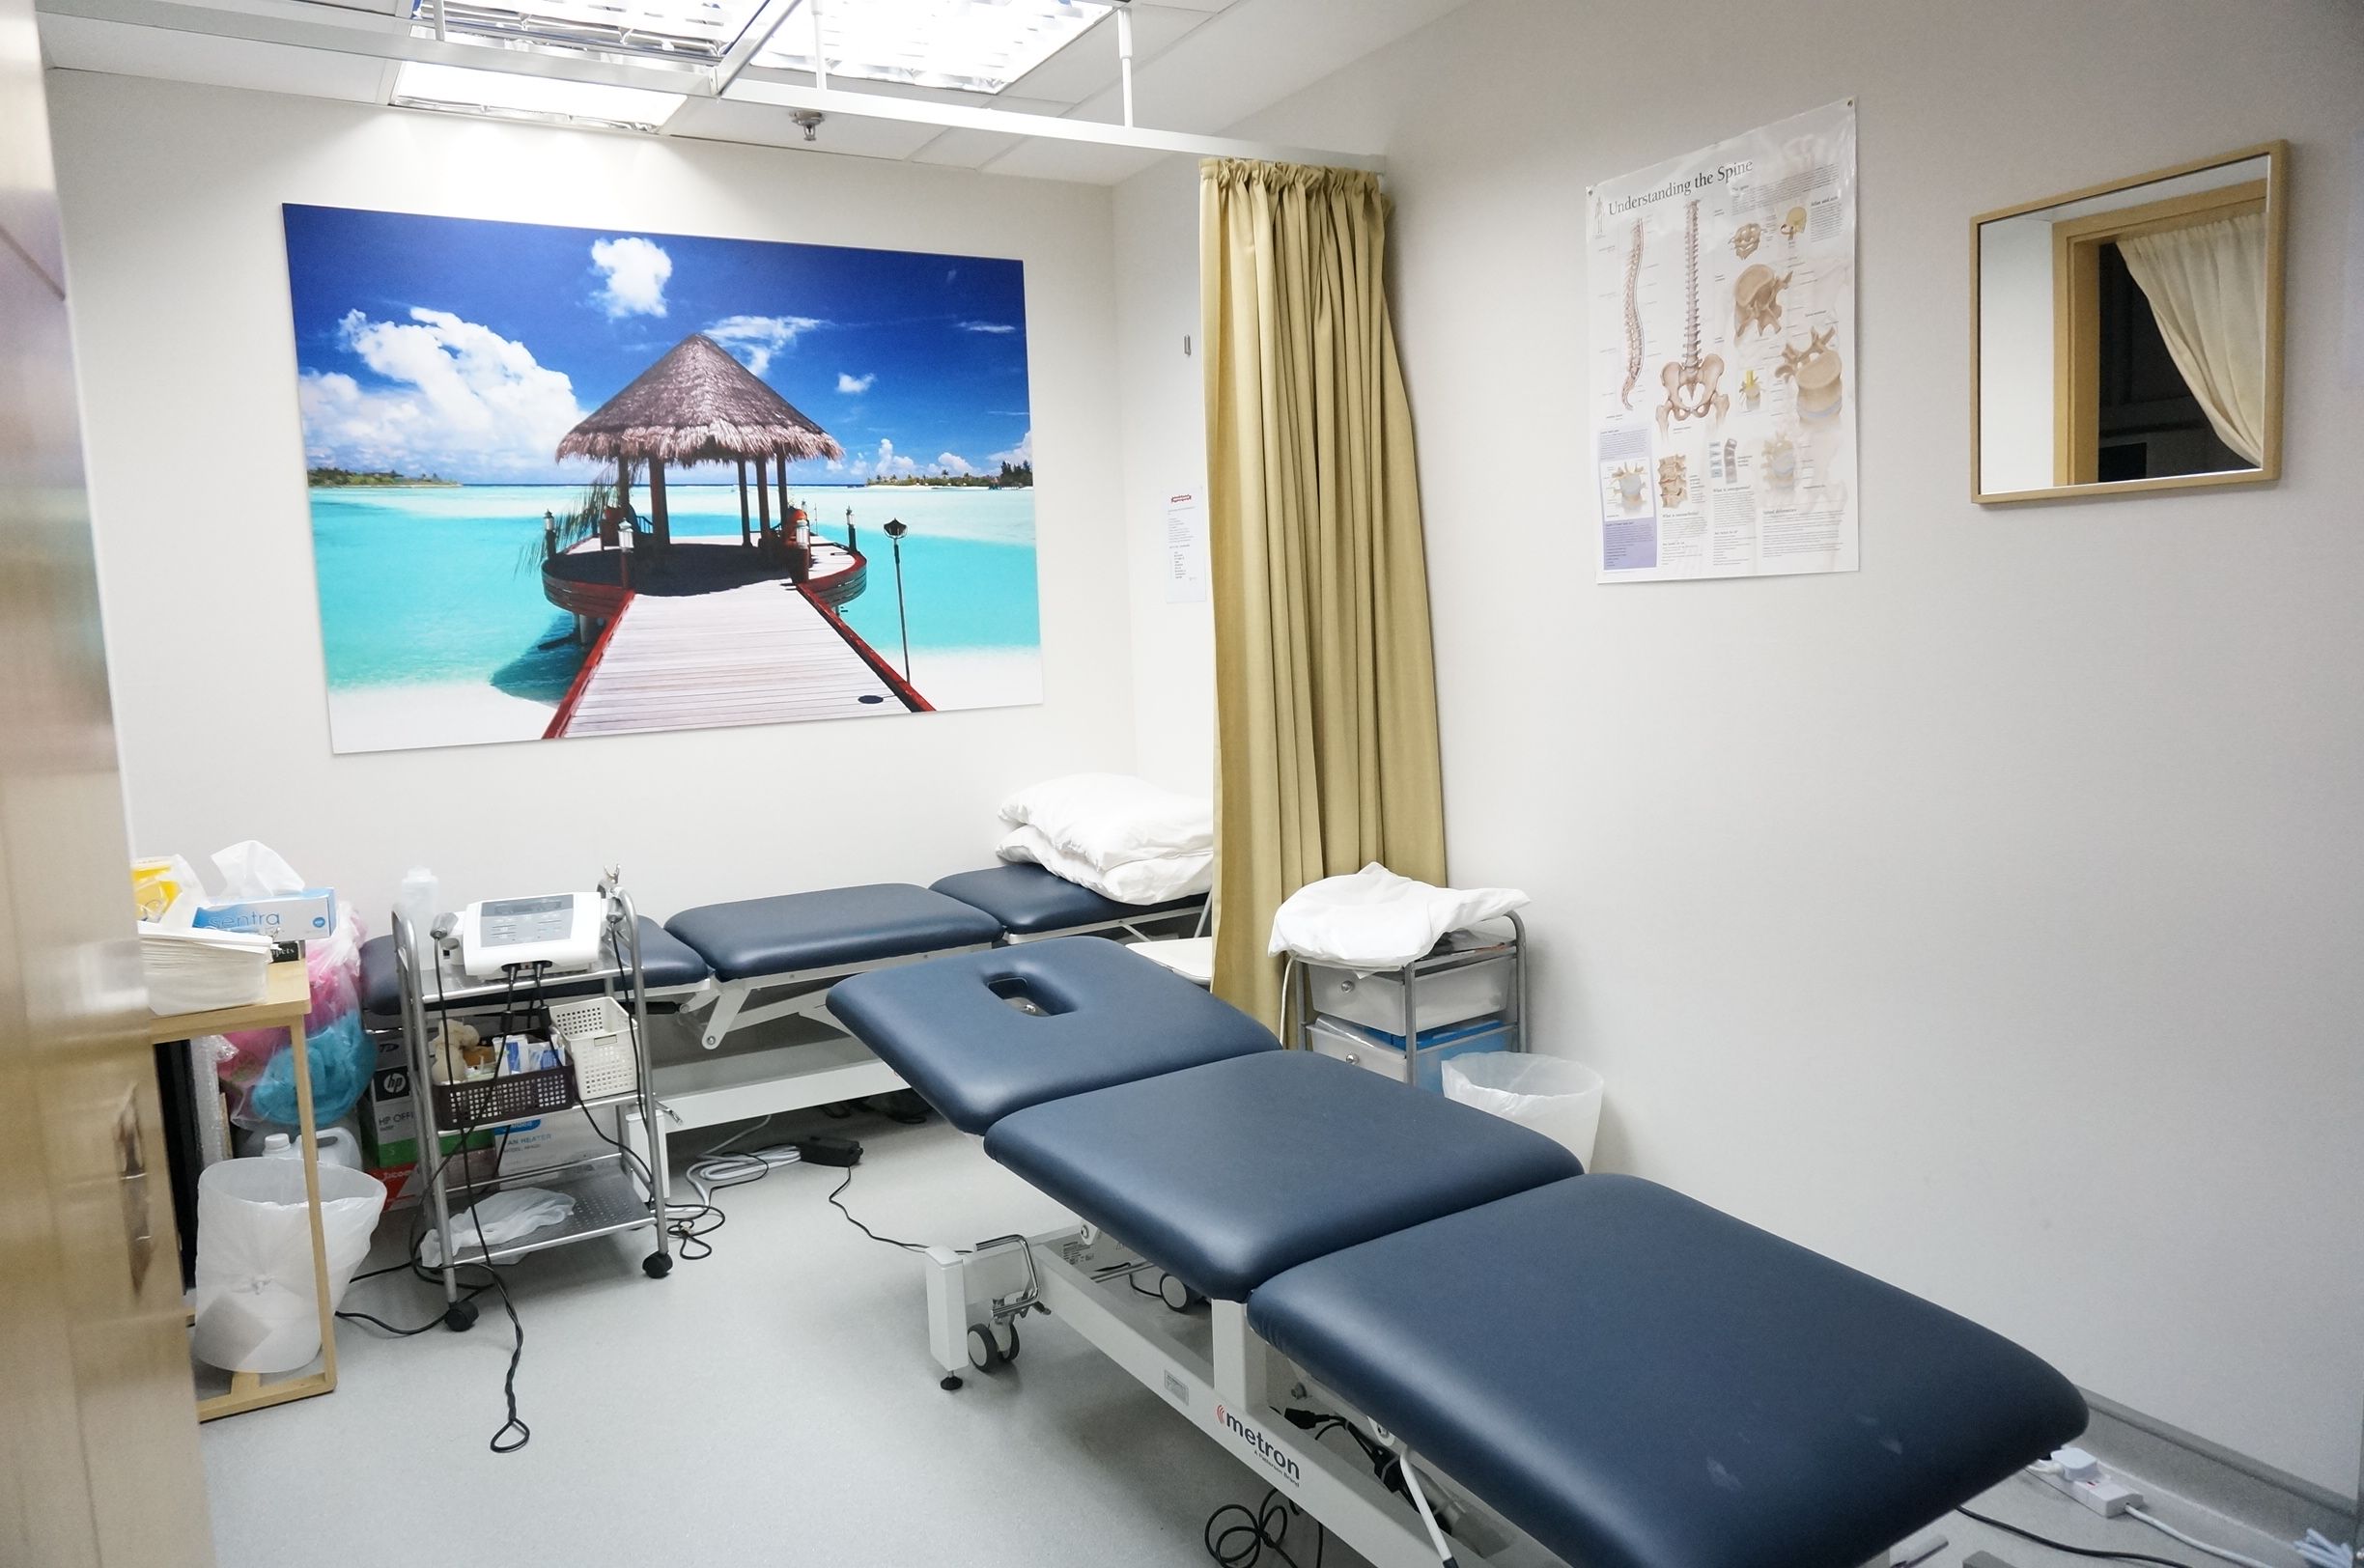 Two physiotherapy beds in a room that can be divided by a curtain